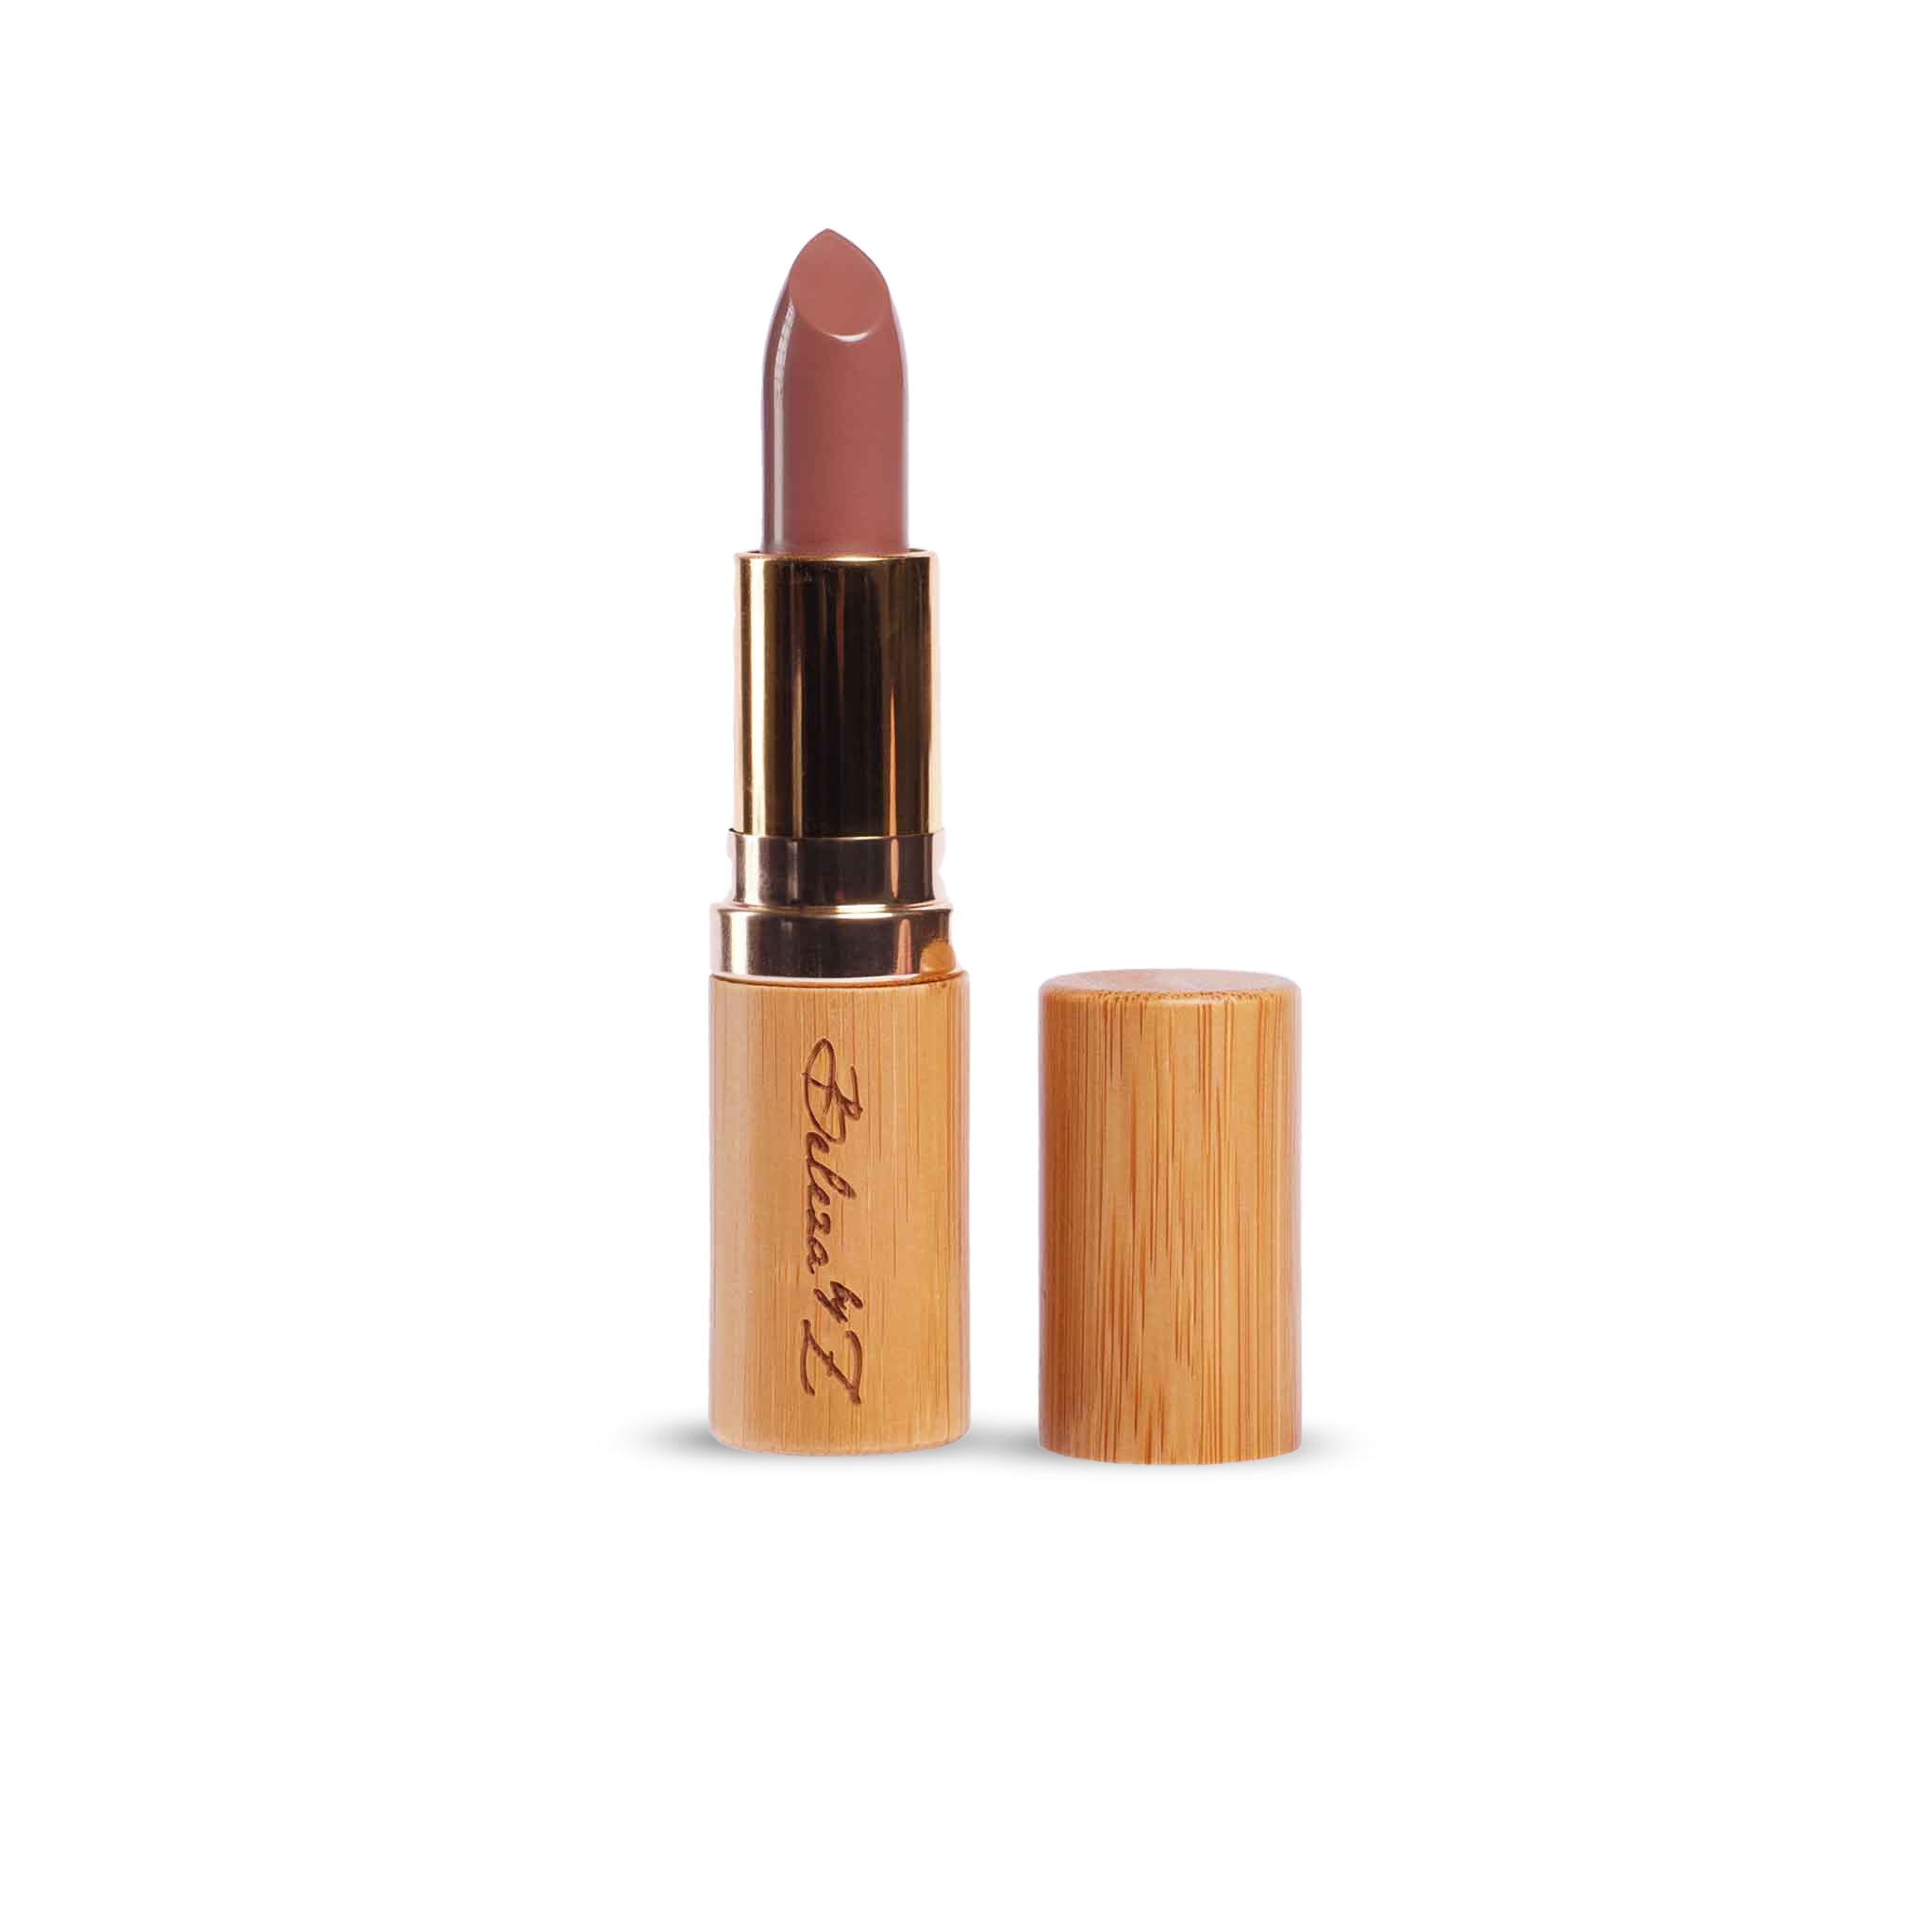 Ultra-creamy moisturizing lipstick in color Independent